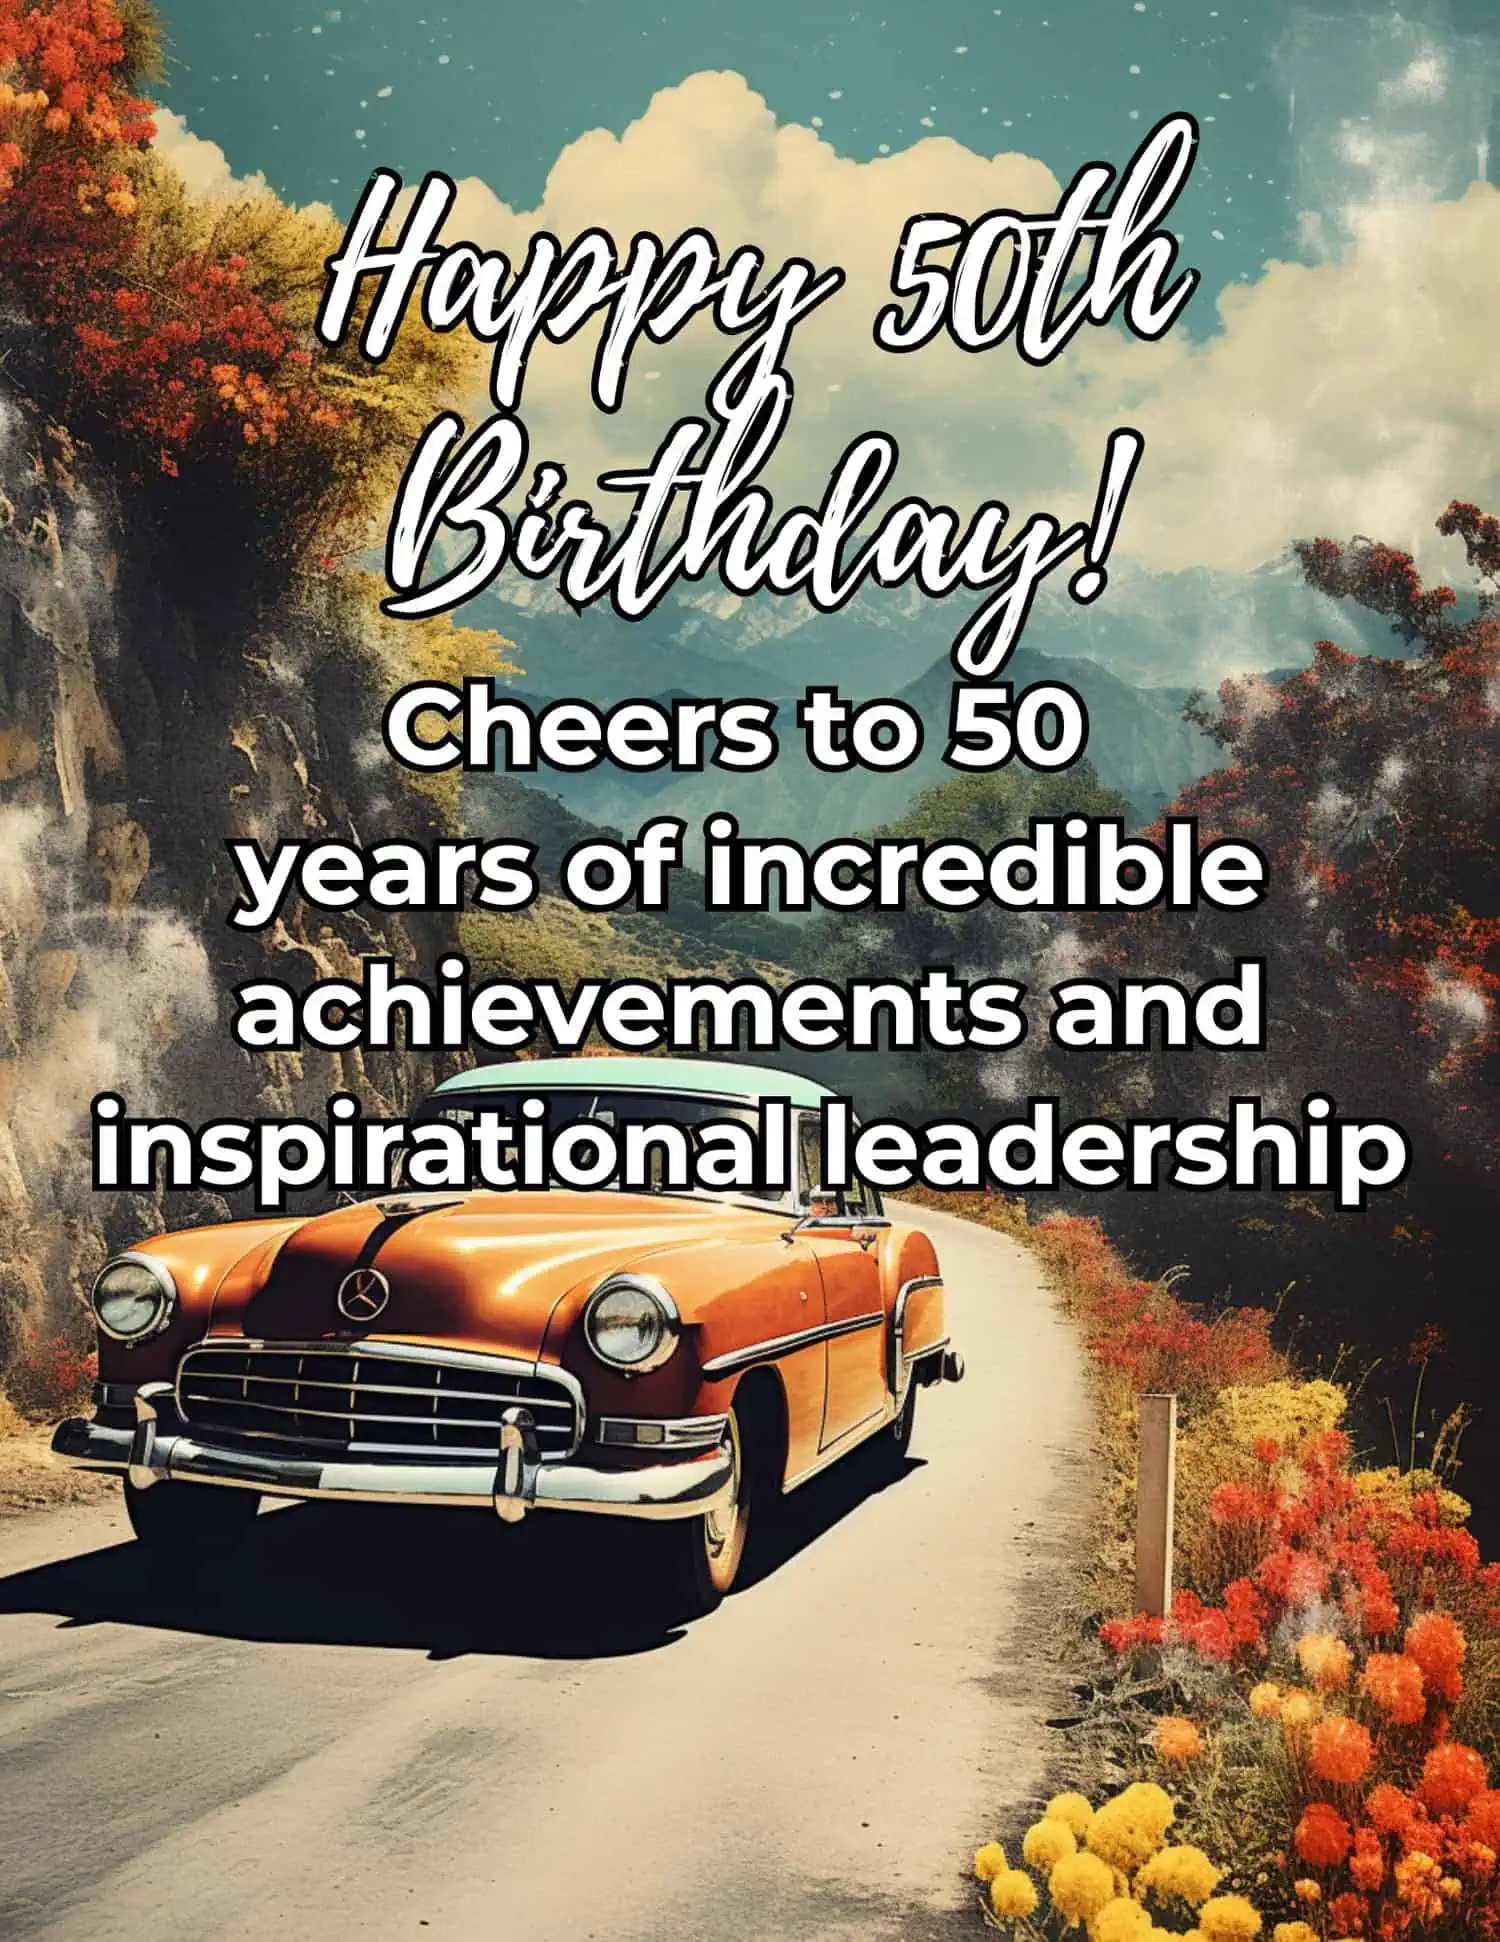 A selection of thoughtful and respectful birthday messages for your boss's 50th birthday, celebrating their achievements and the wisdom they bring to the workplace.